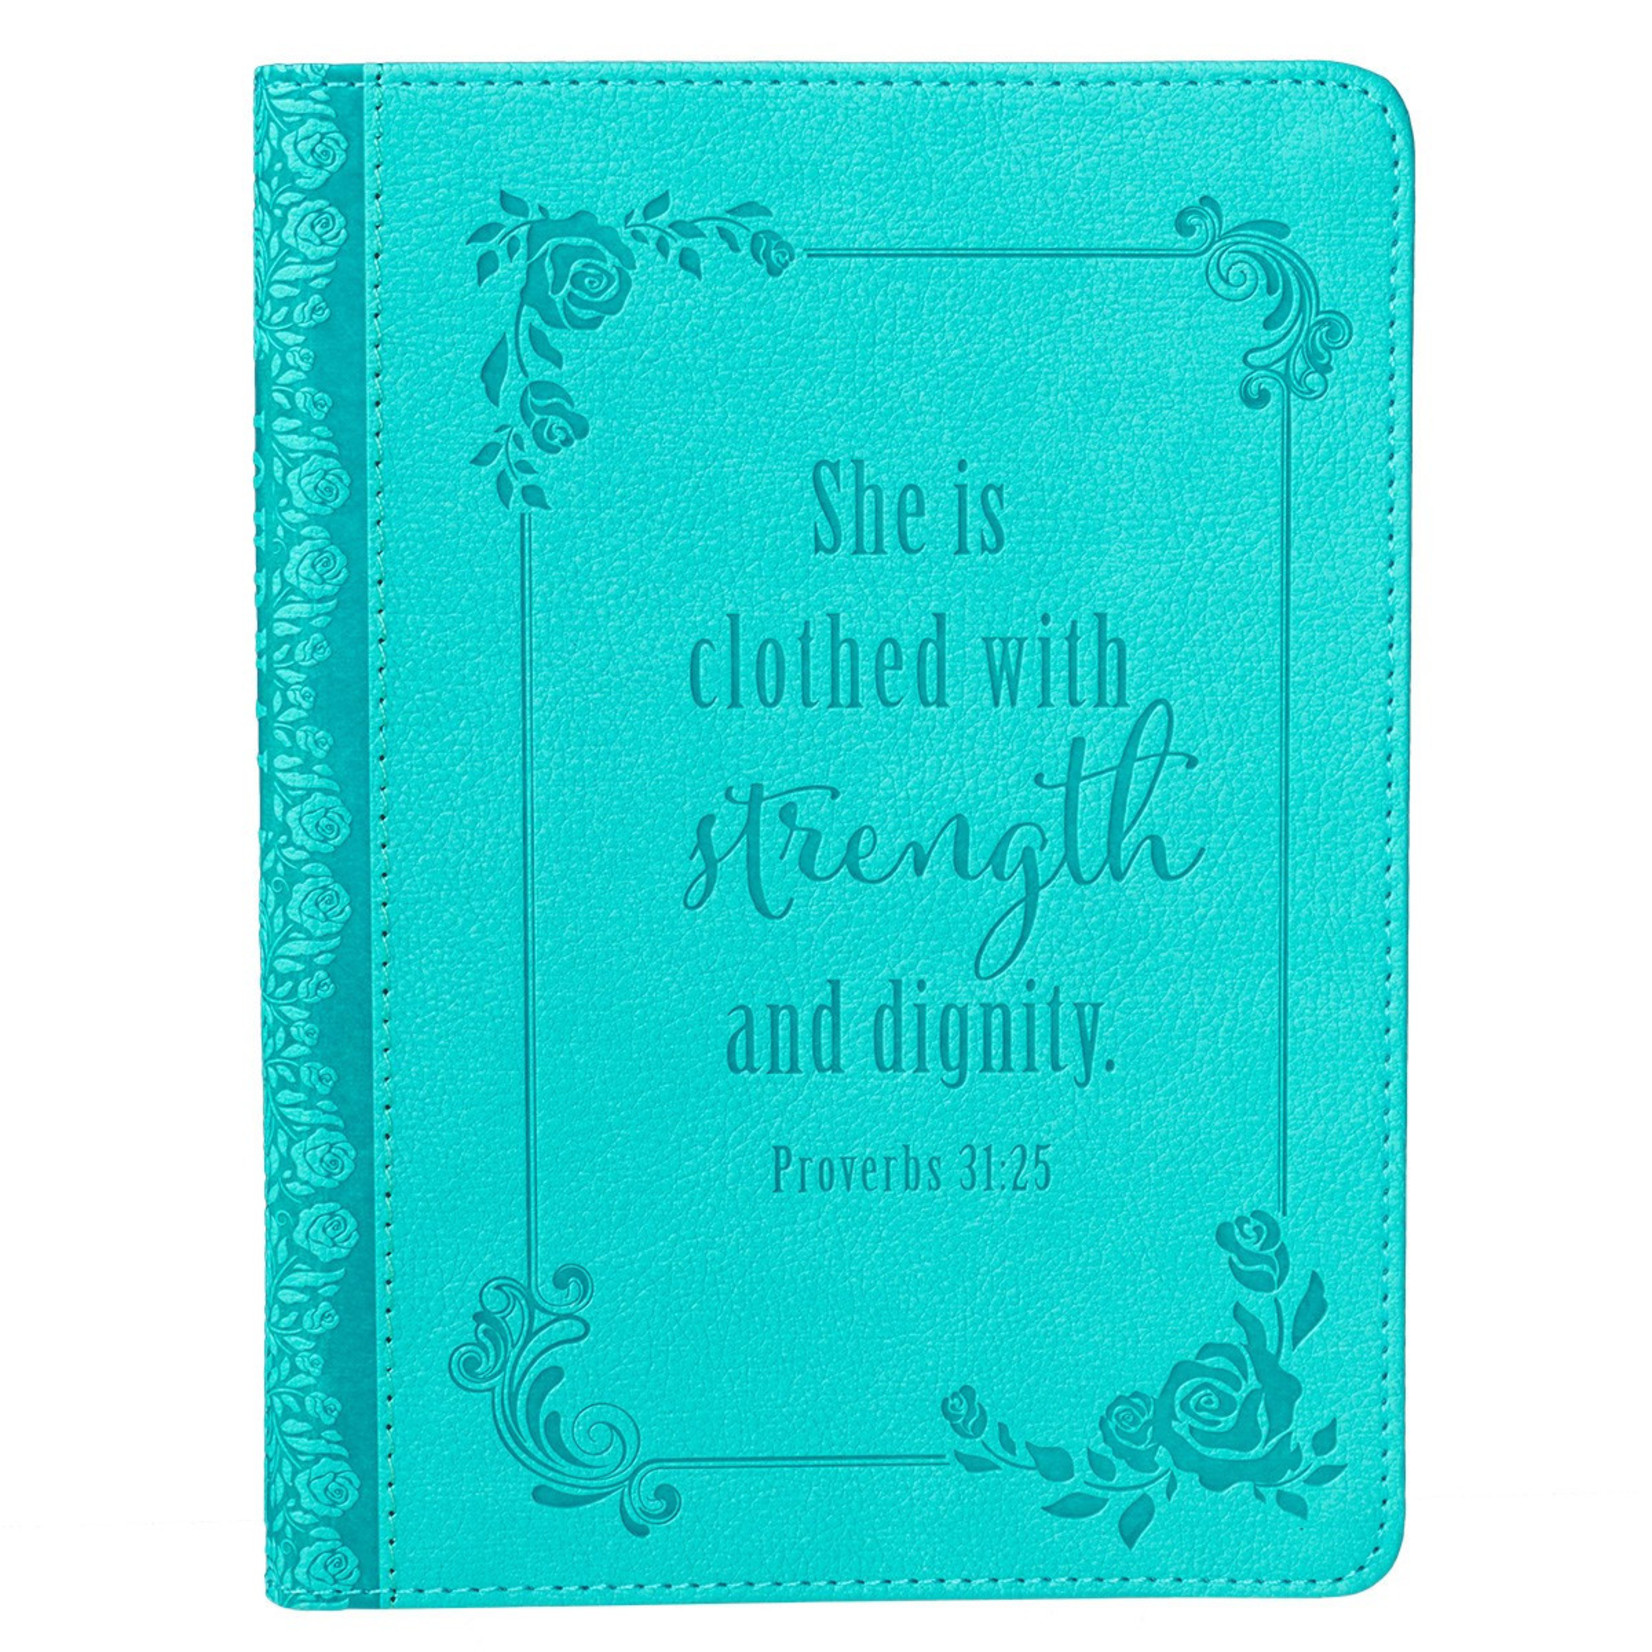 Christian Art Gifts Strength and Dignity Teal Handy-sized Faux Leather Journal - Proverbs 31:25